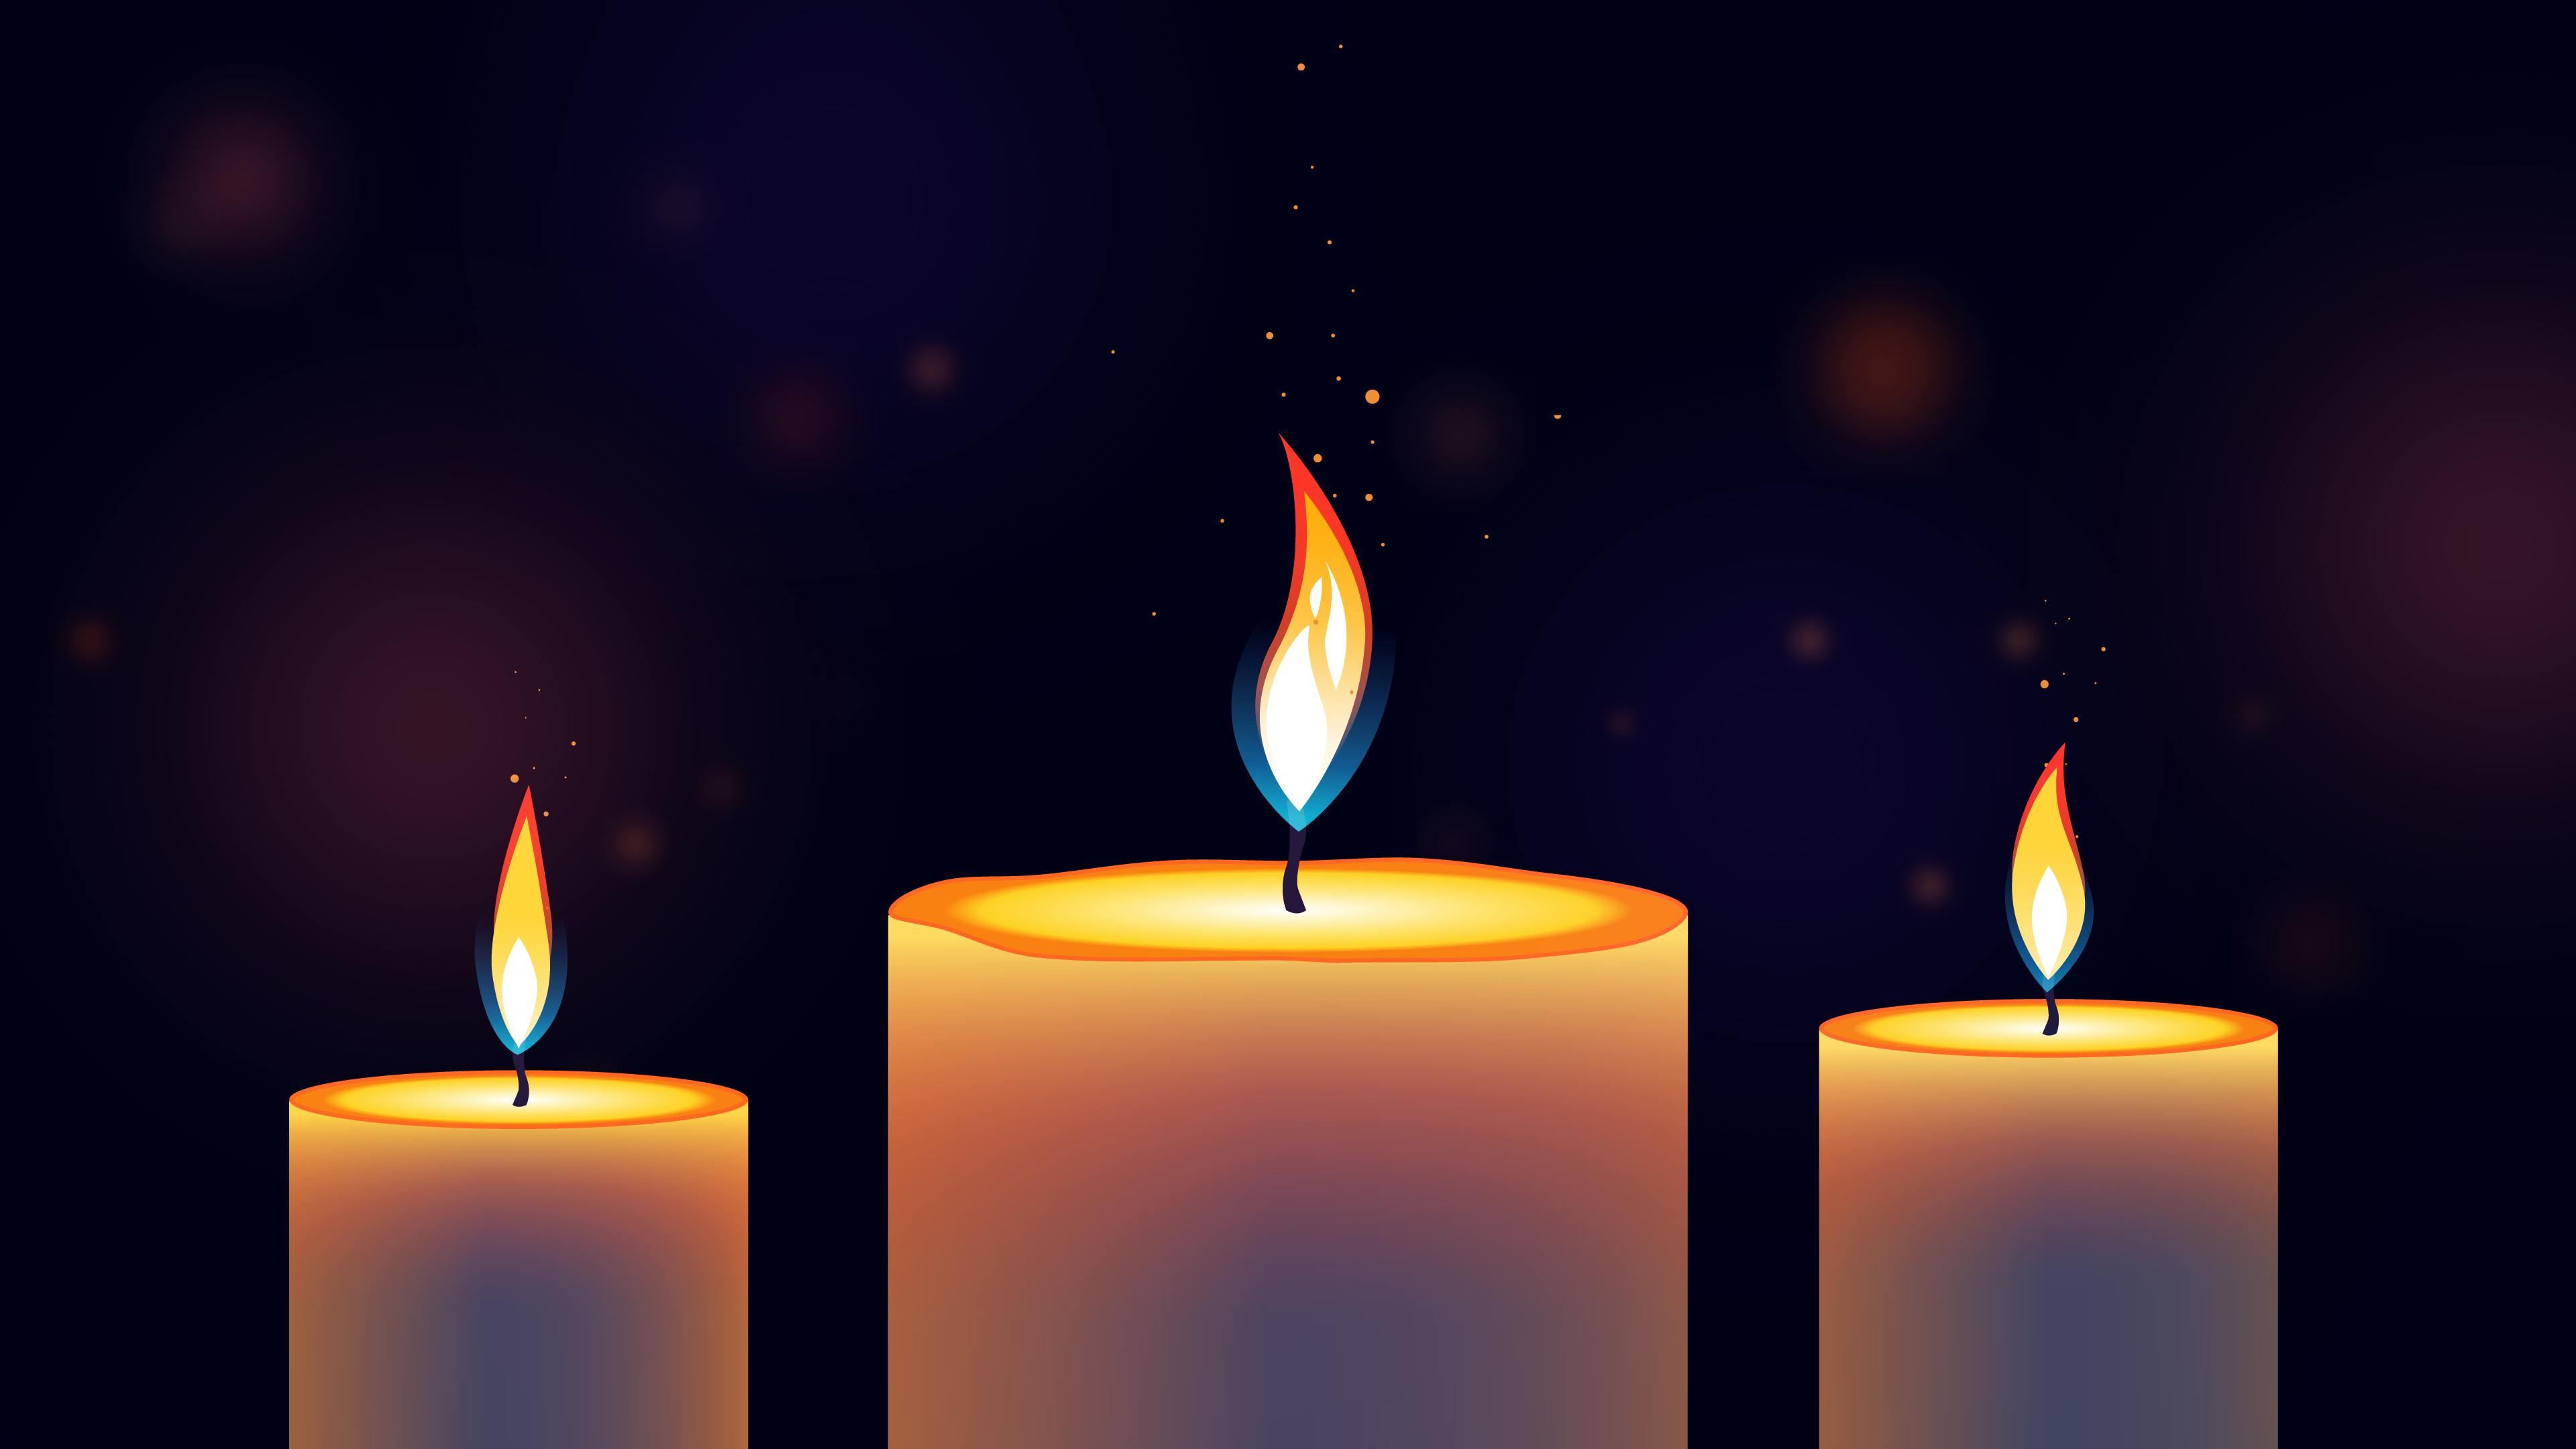 An illustrated graphic of three lit candles.